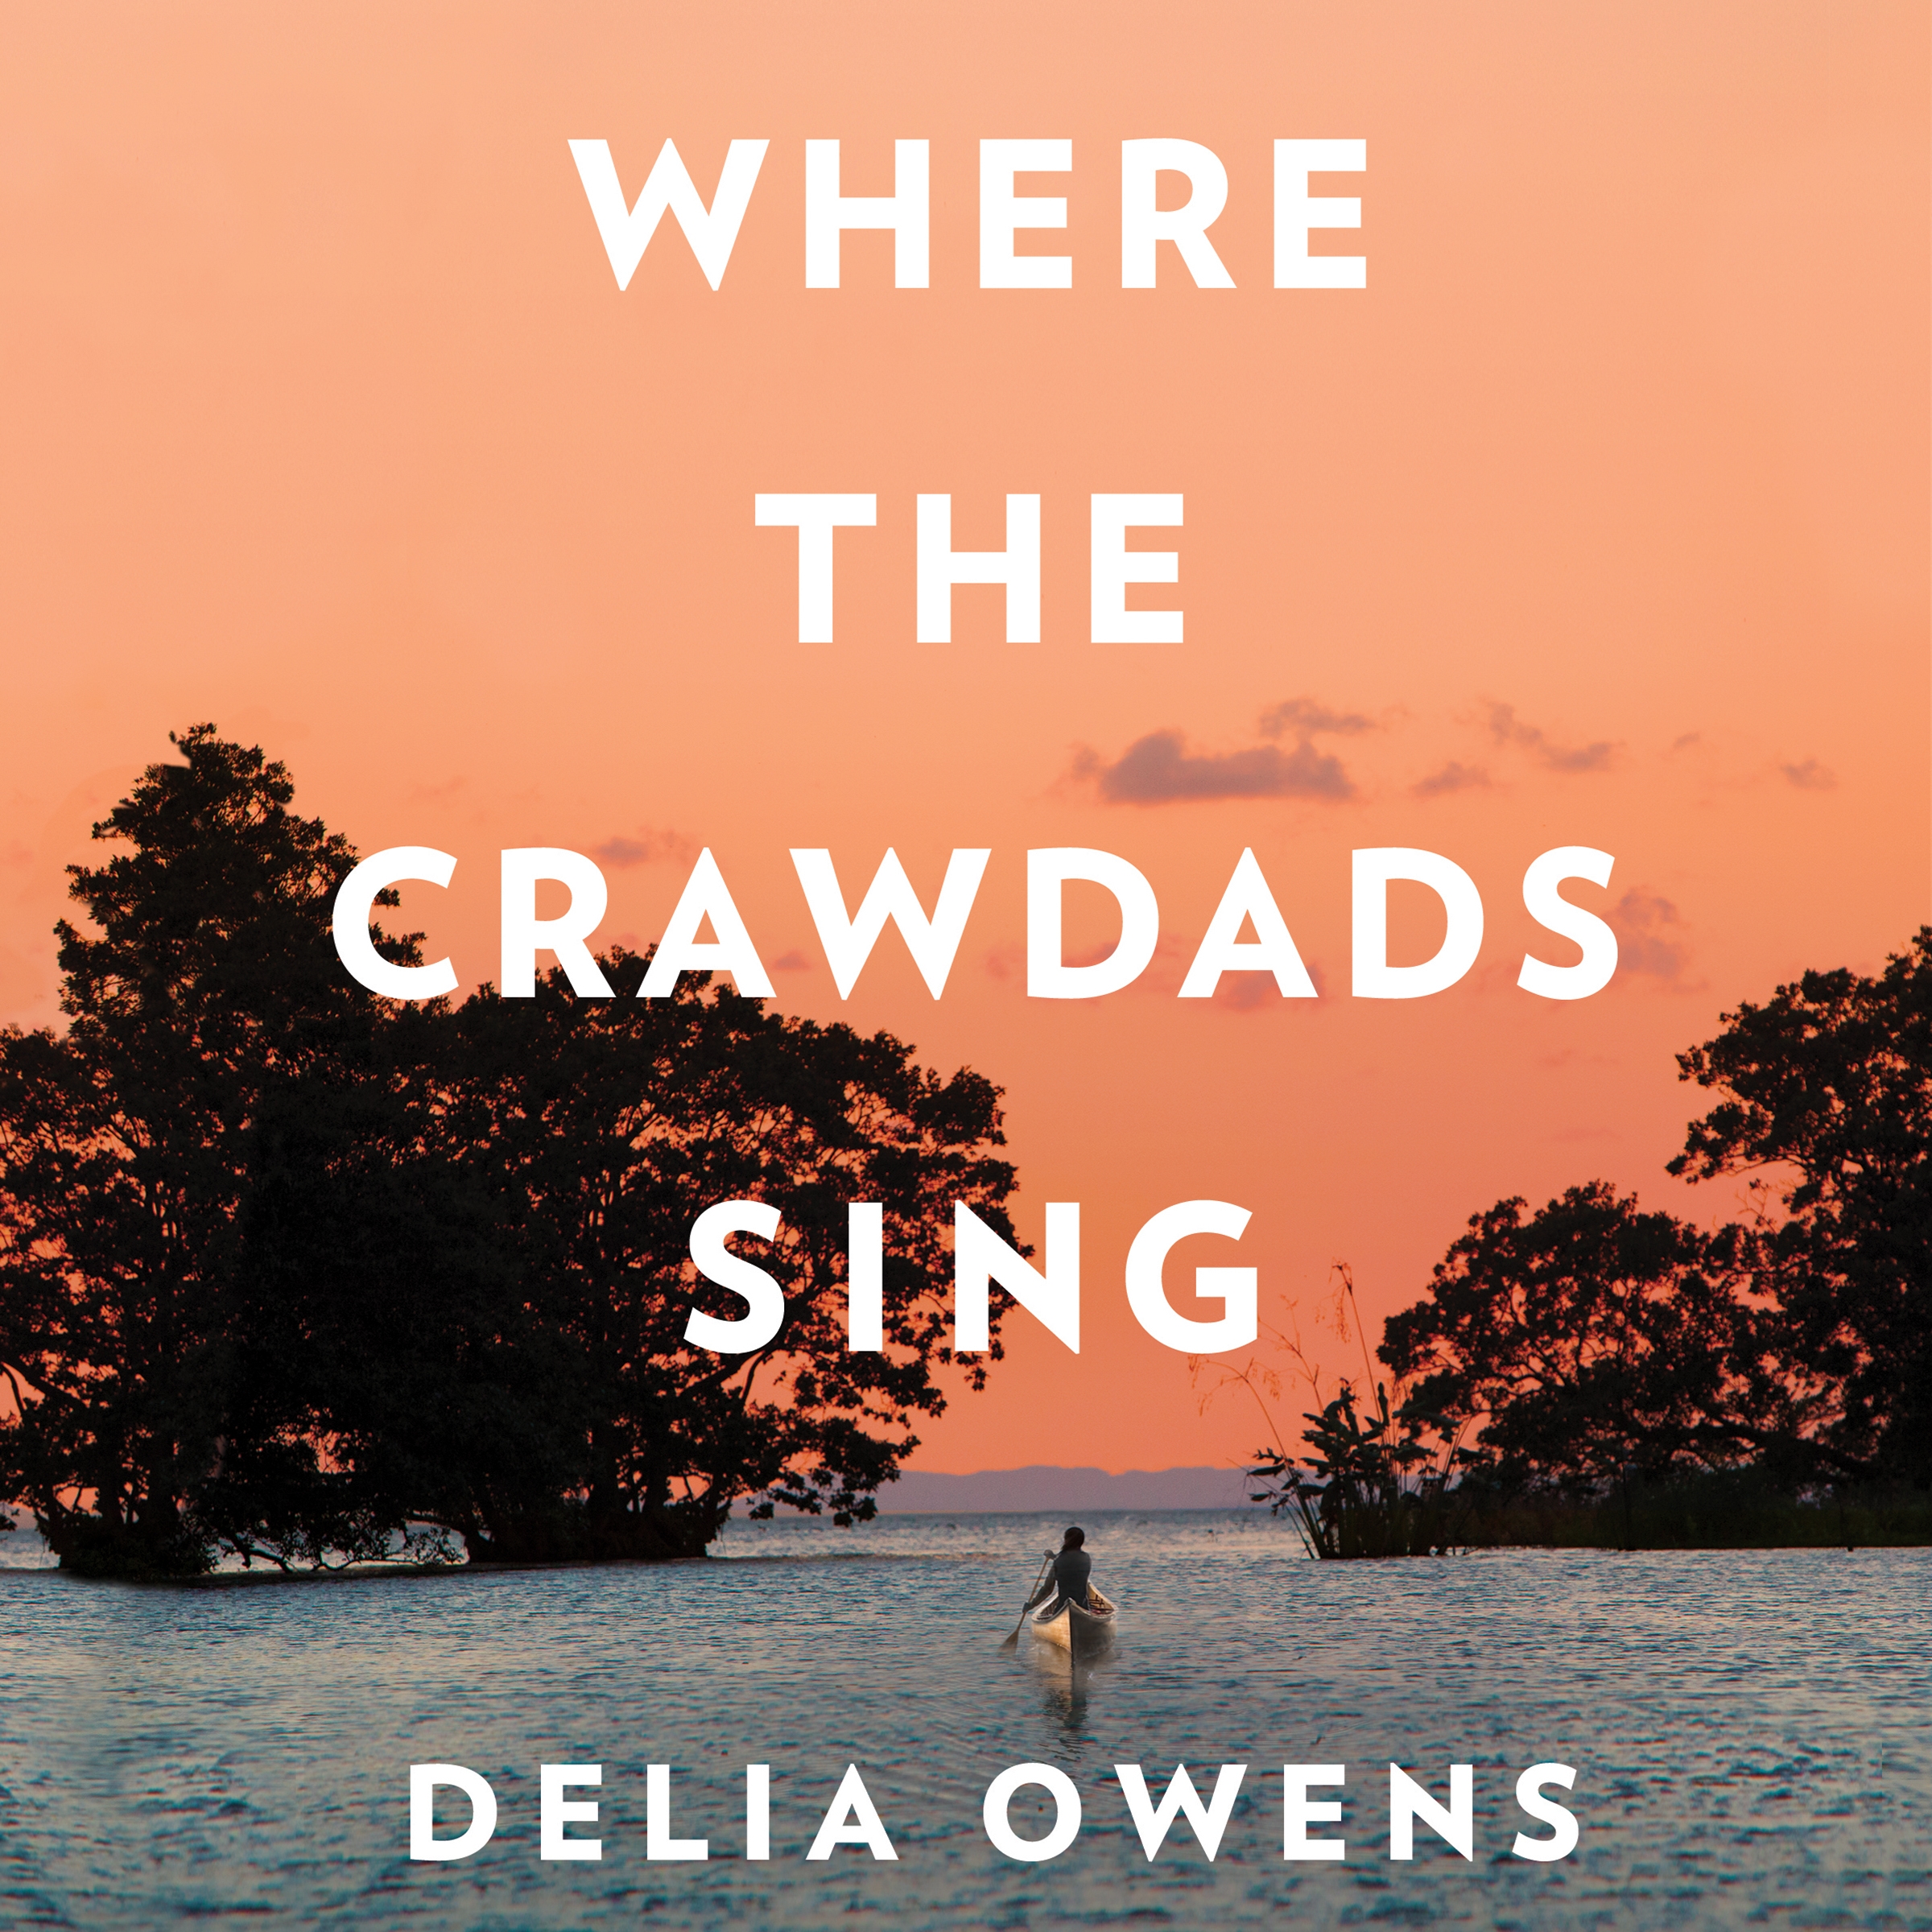 where the crawdads sing book review goodreads